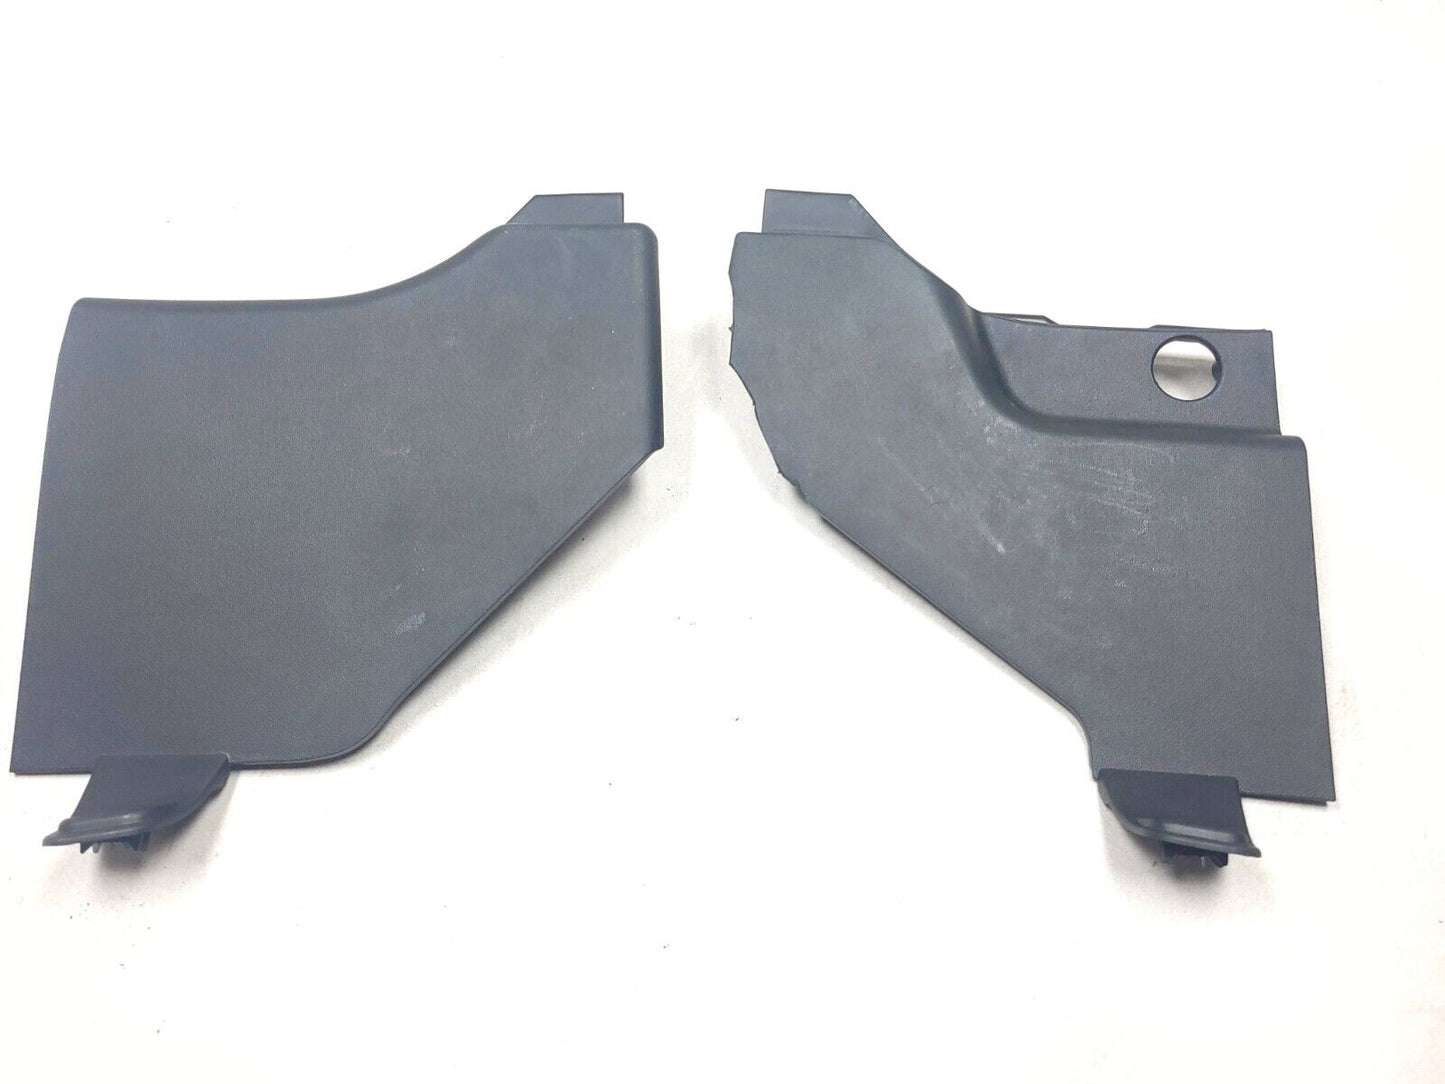 2013-2016 Genesis Coupe Kick Panel Cover Trim Cowl Lower Left & Right Pair OEM